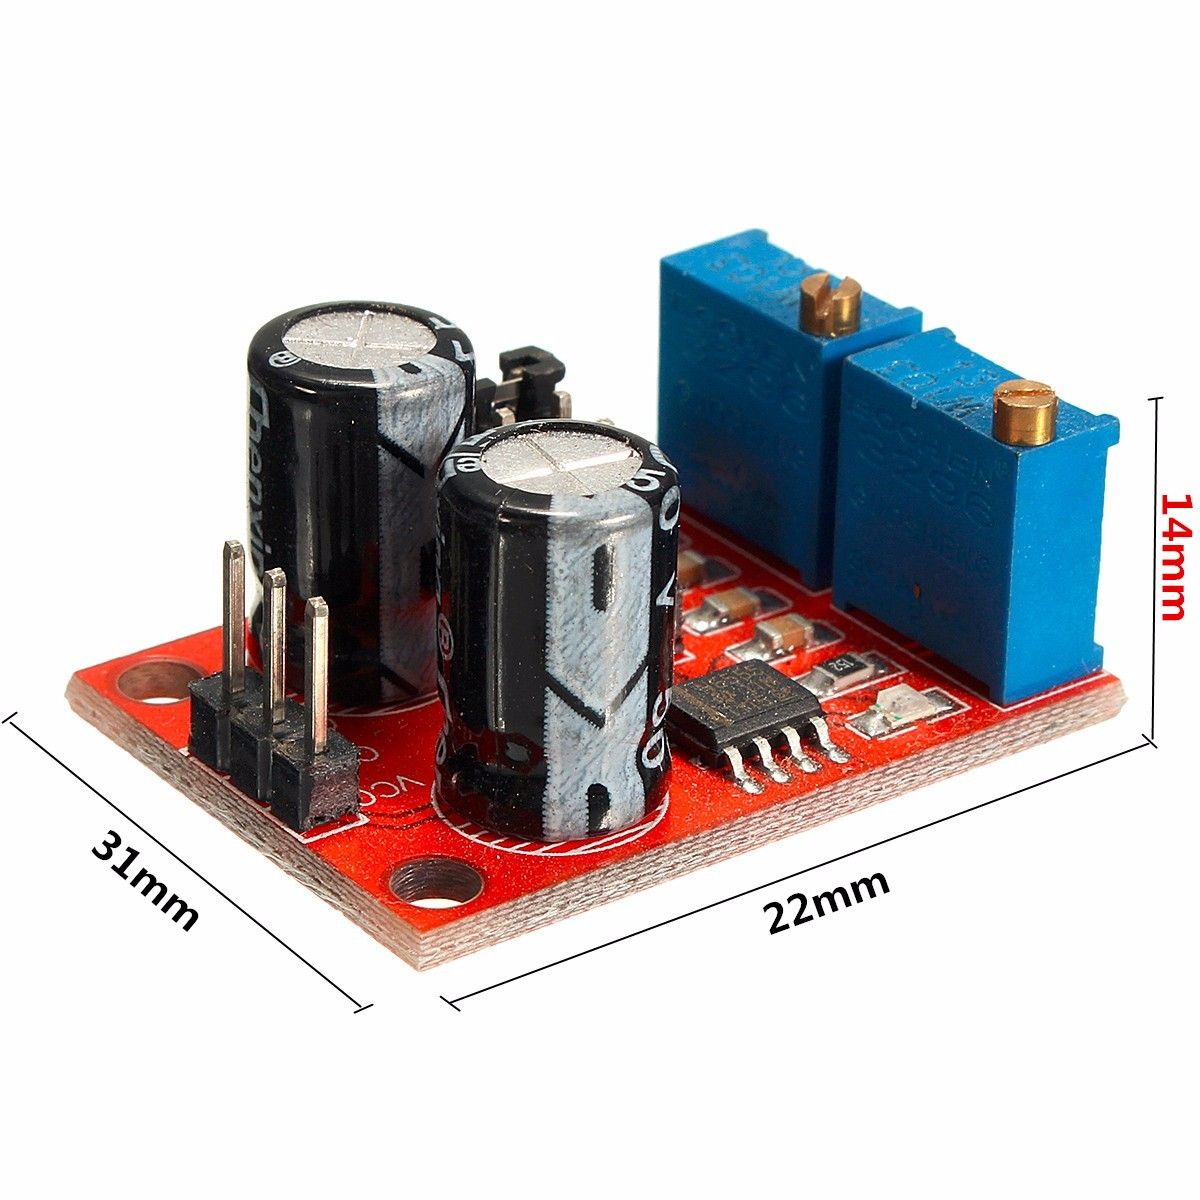 20Pcs-NE555-Pulse-Frequency-Duty-Cycle-Adjustable-Module-Square-Wave-Signal-Generator-1067377